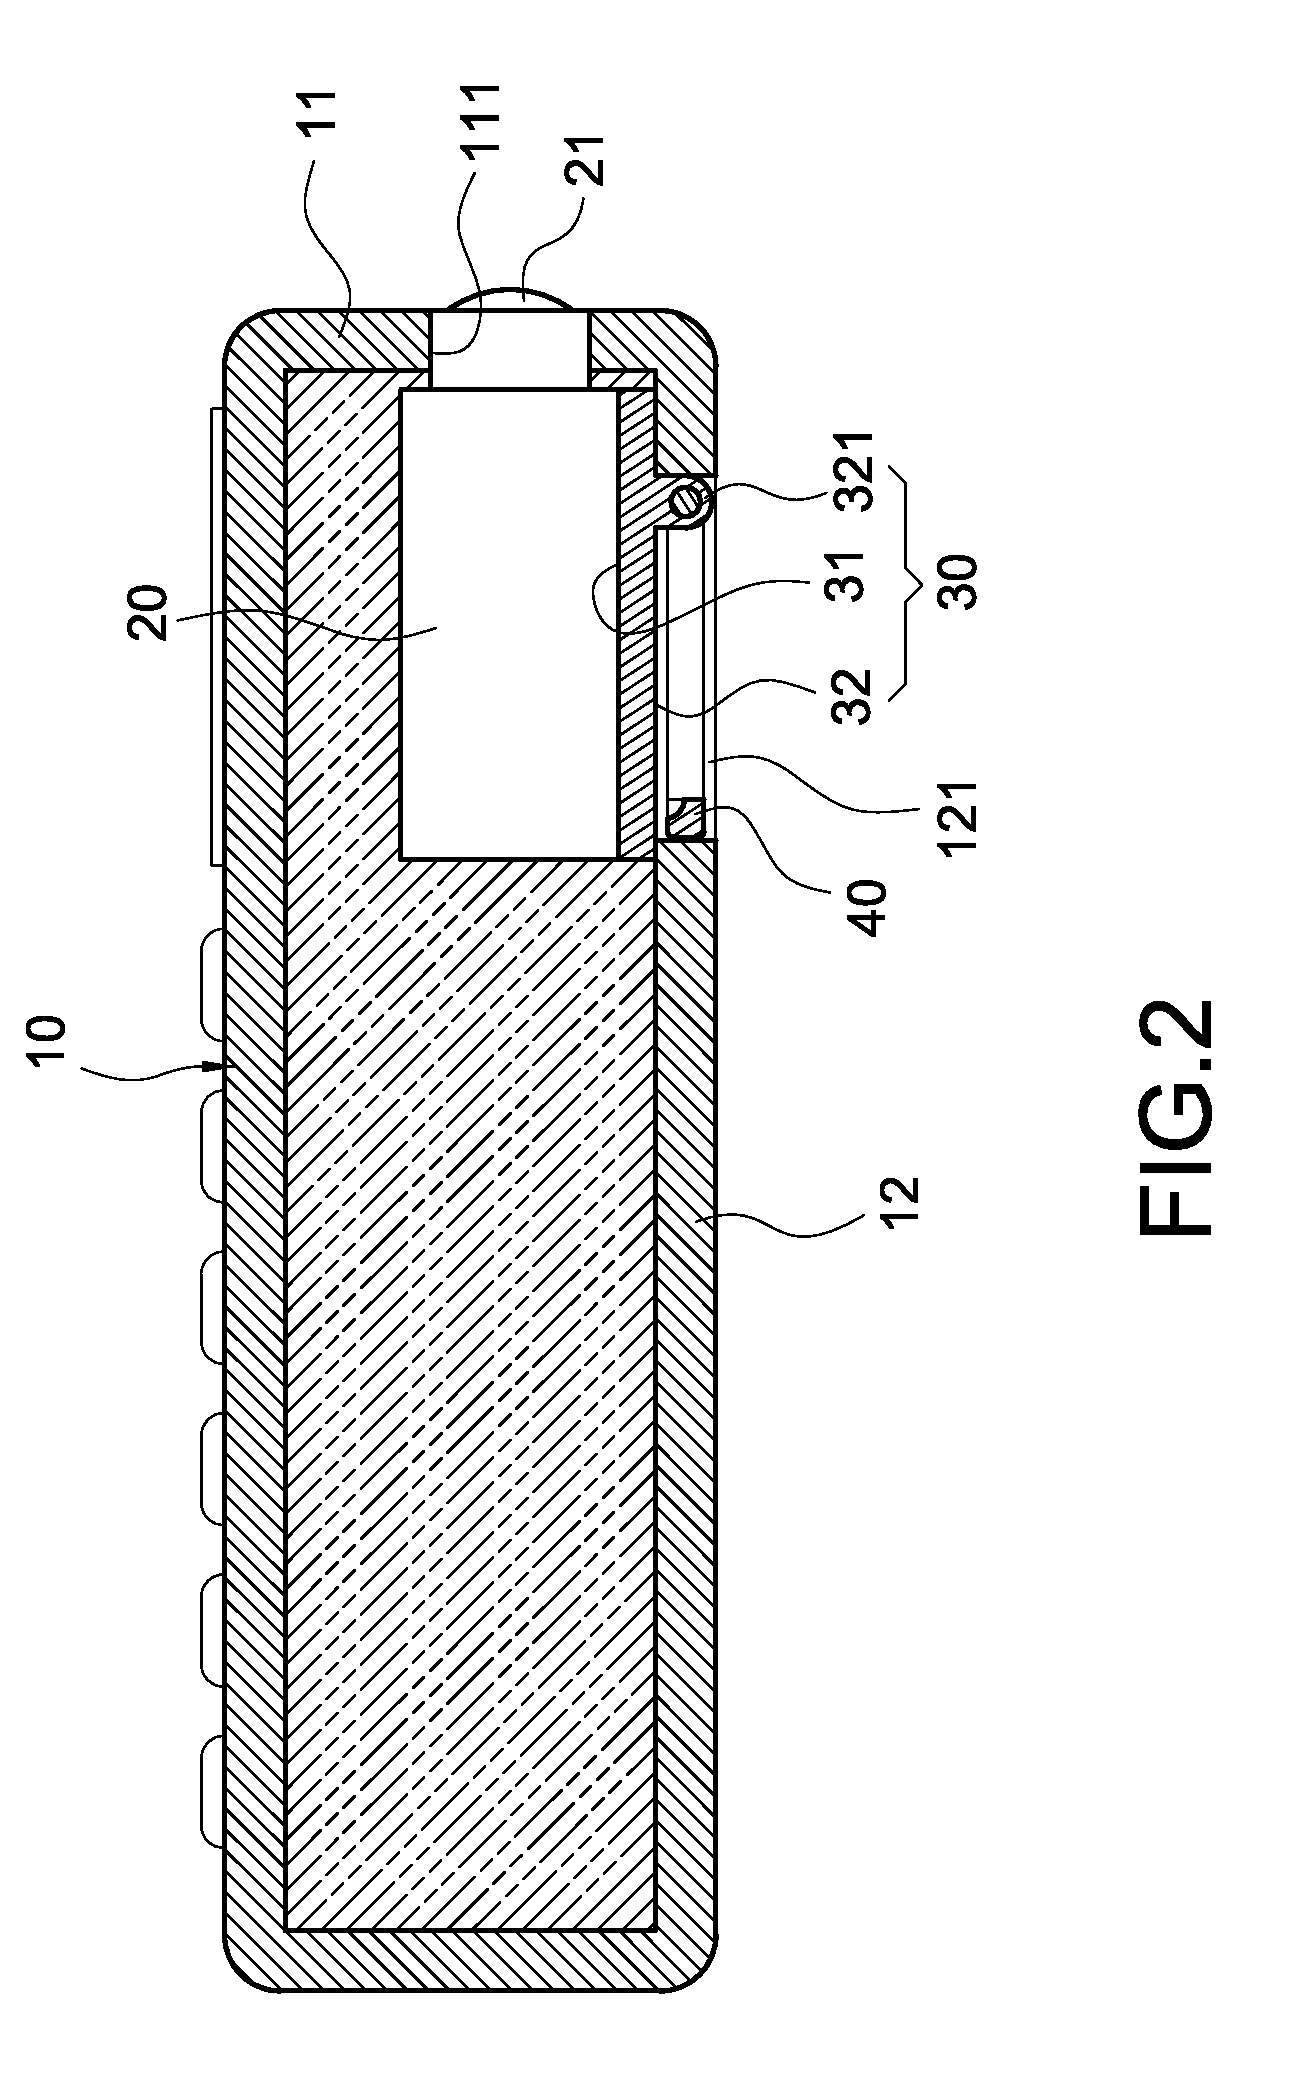 Portable electronic device with micro-projecting module